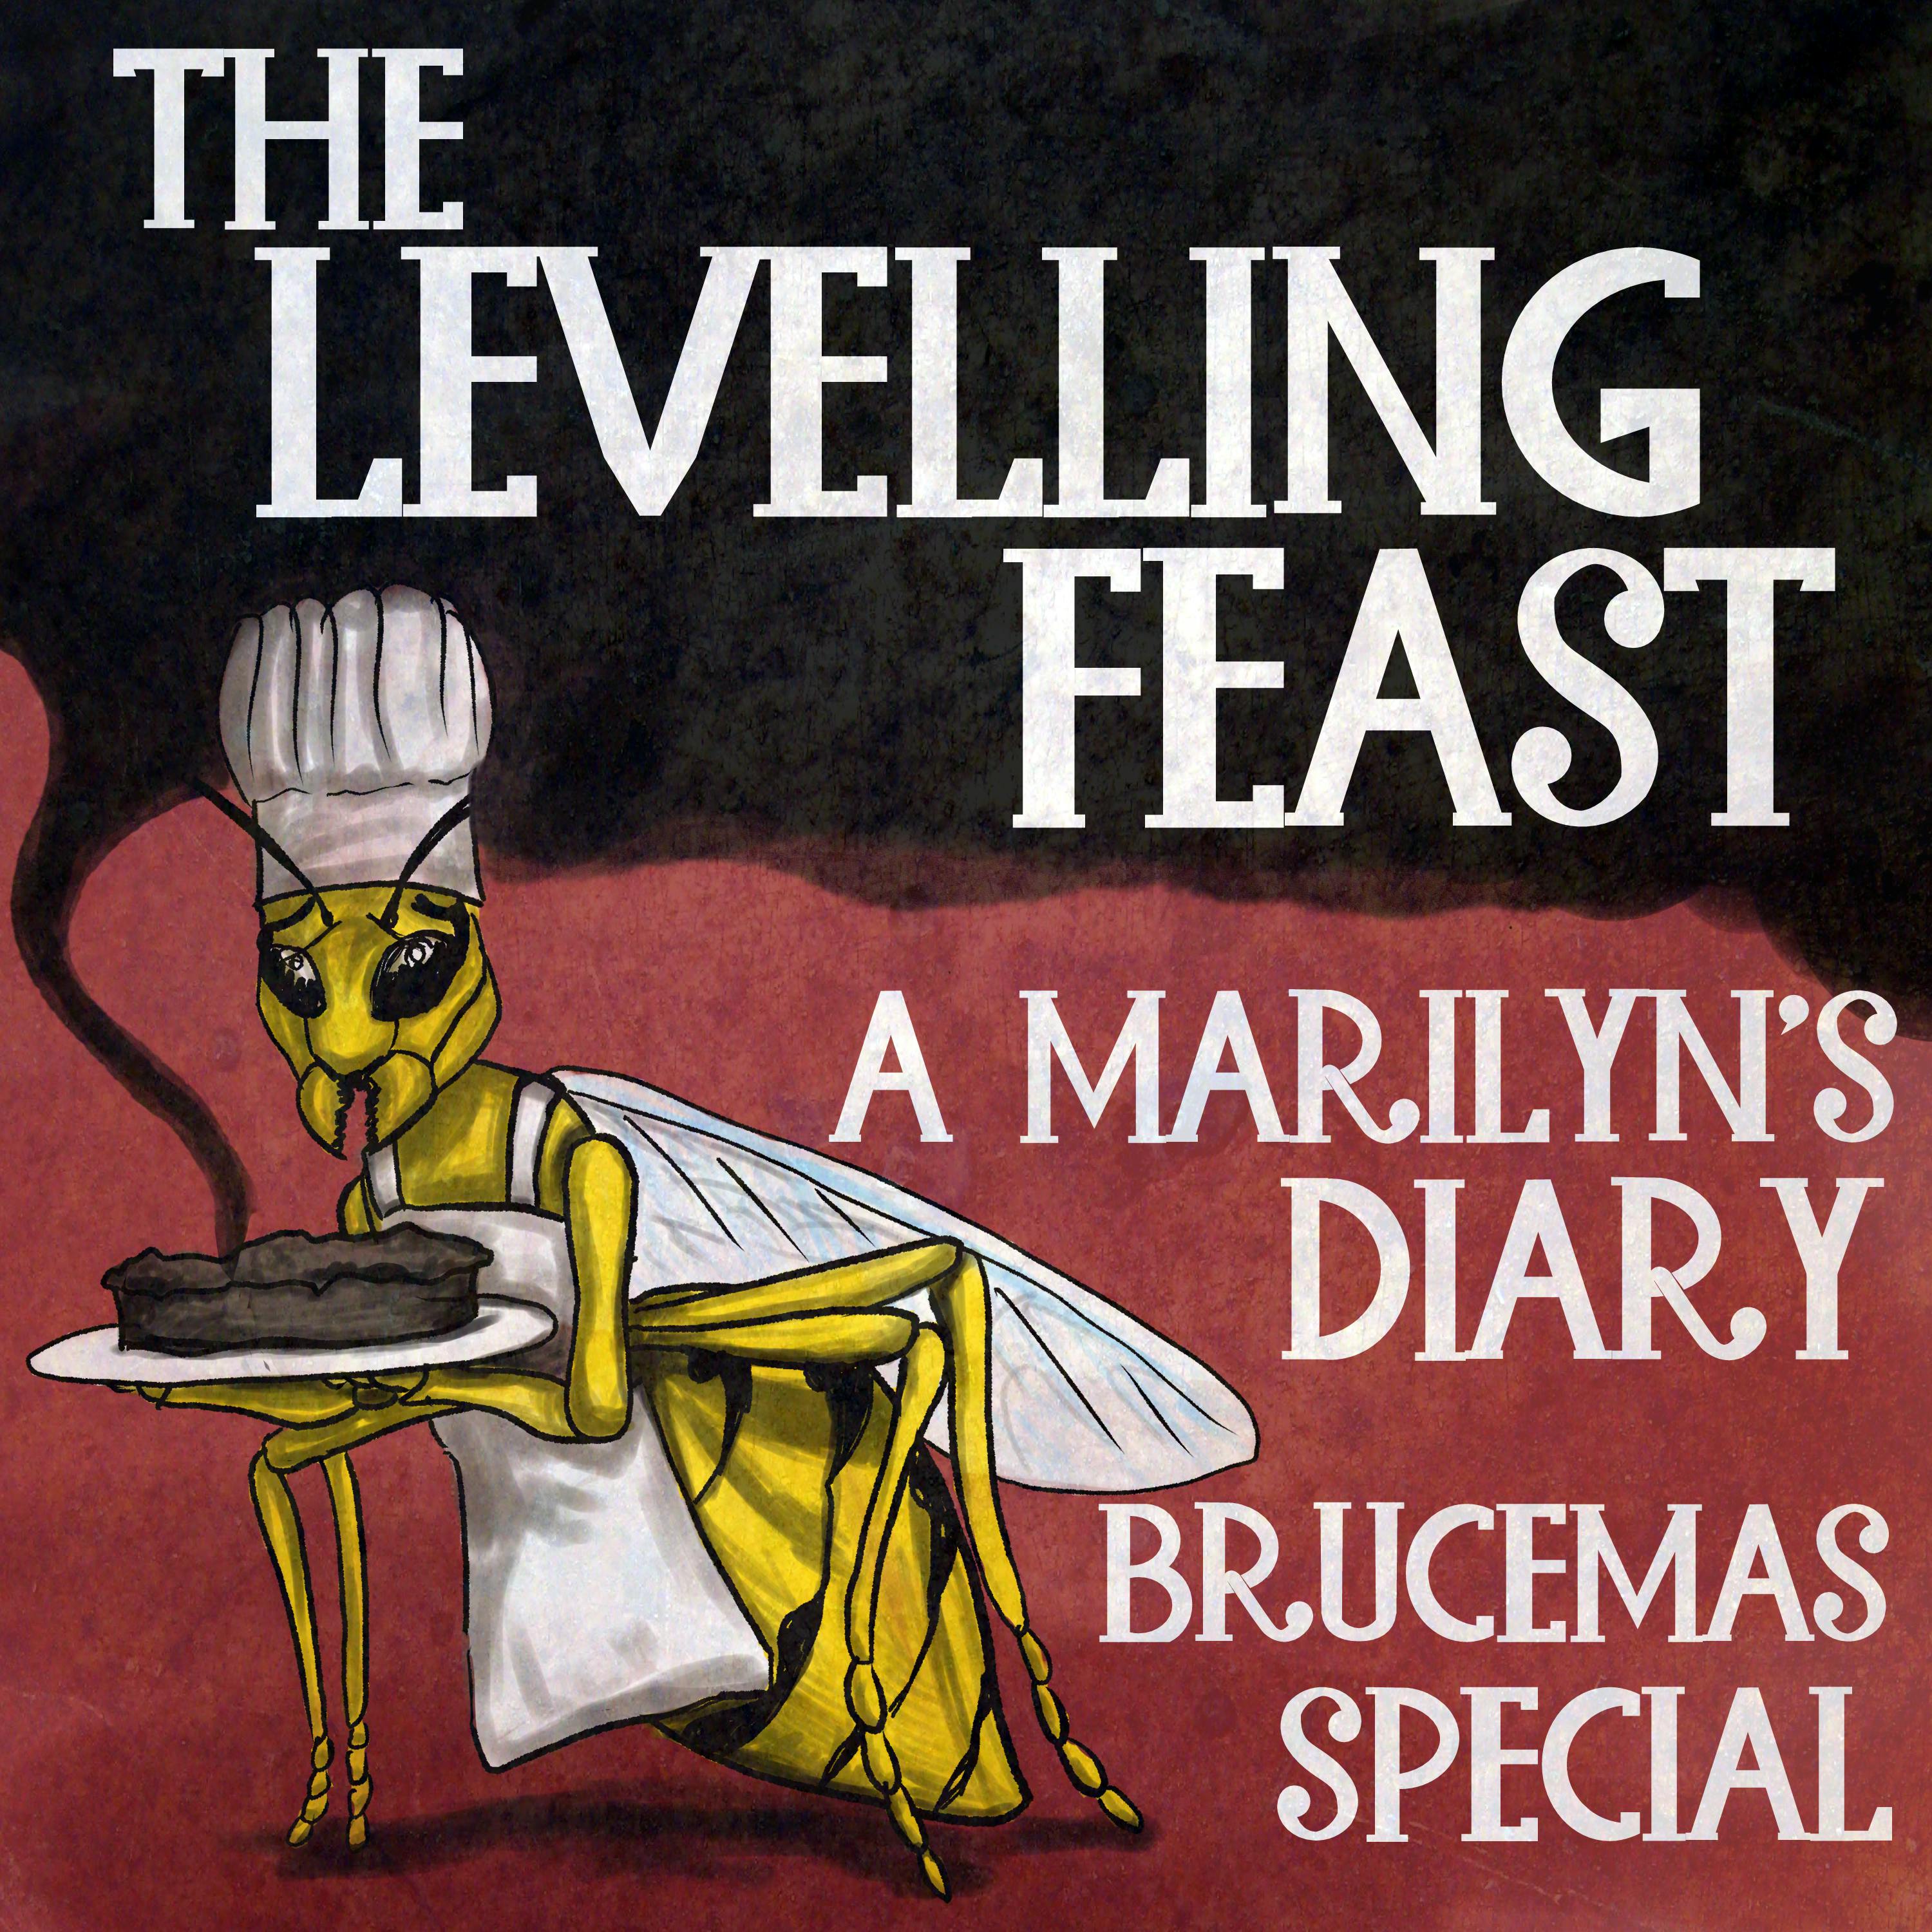 (TRAILER) The Levelling Feast: A Marilyn’s Diary Brucemas Special